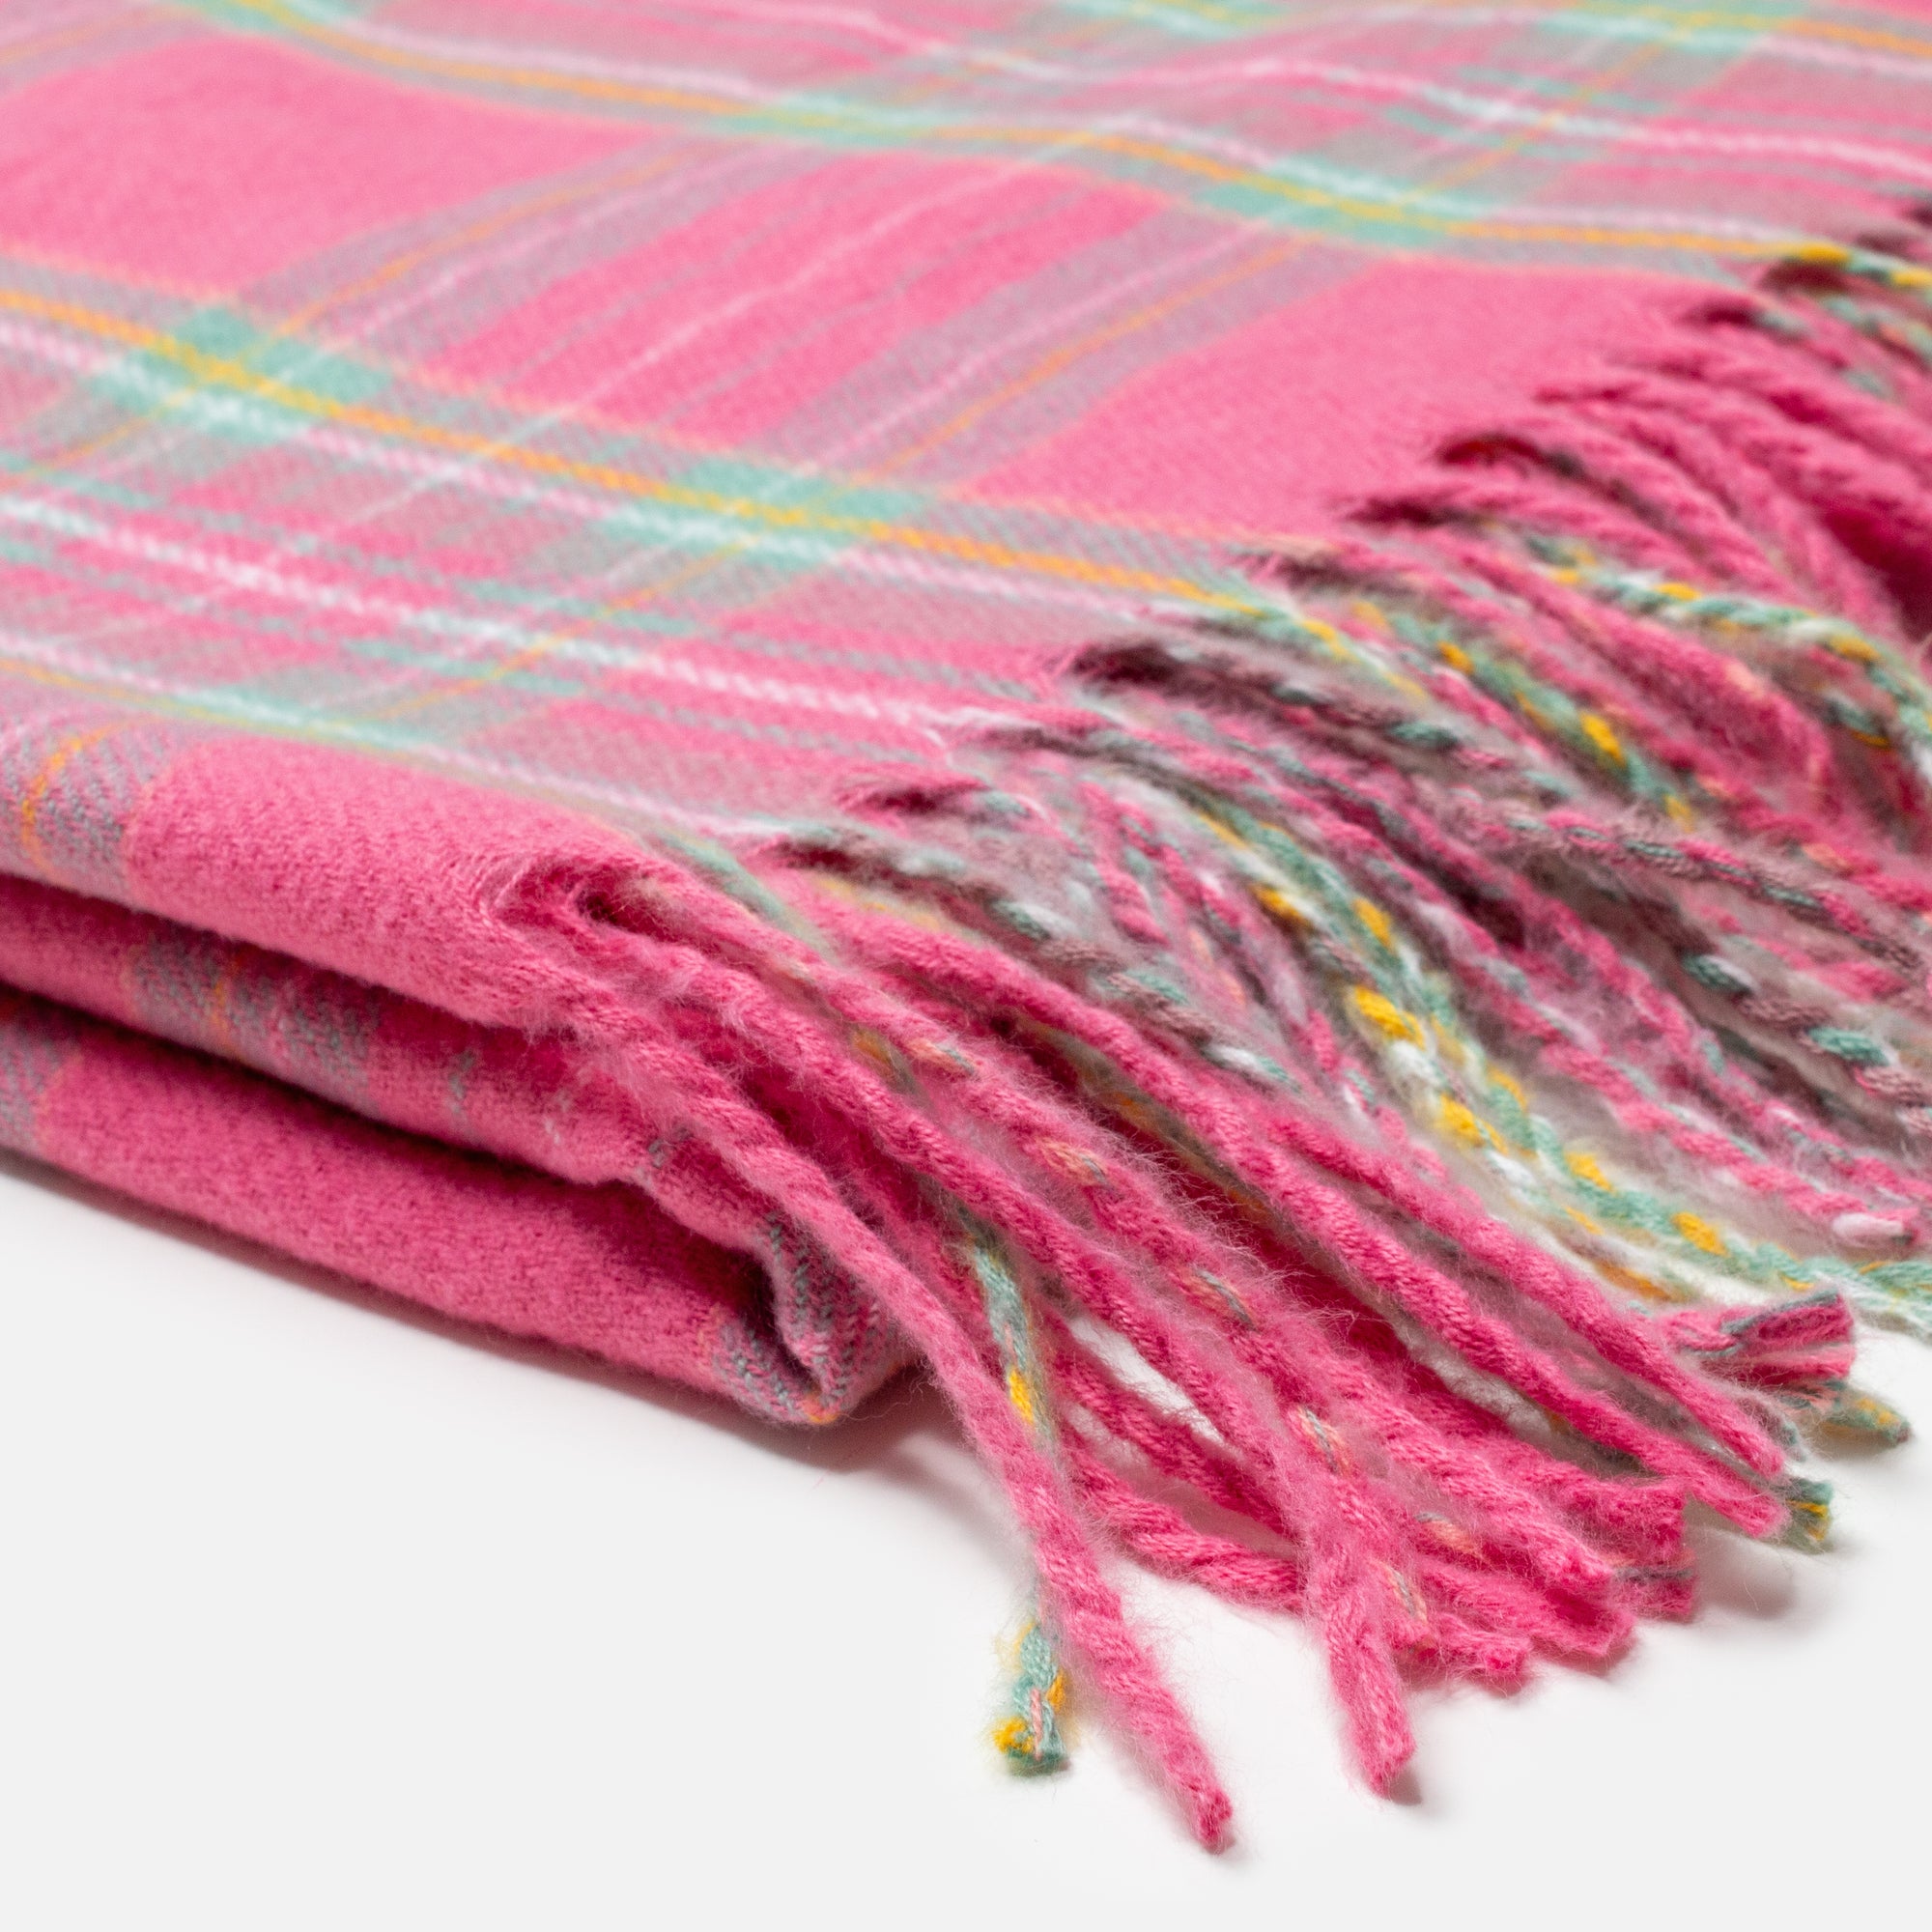 Pink scarf with green and purple checks